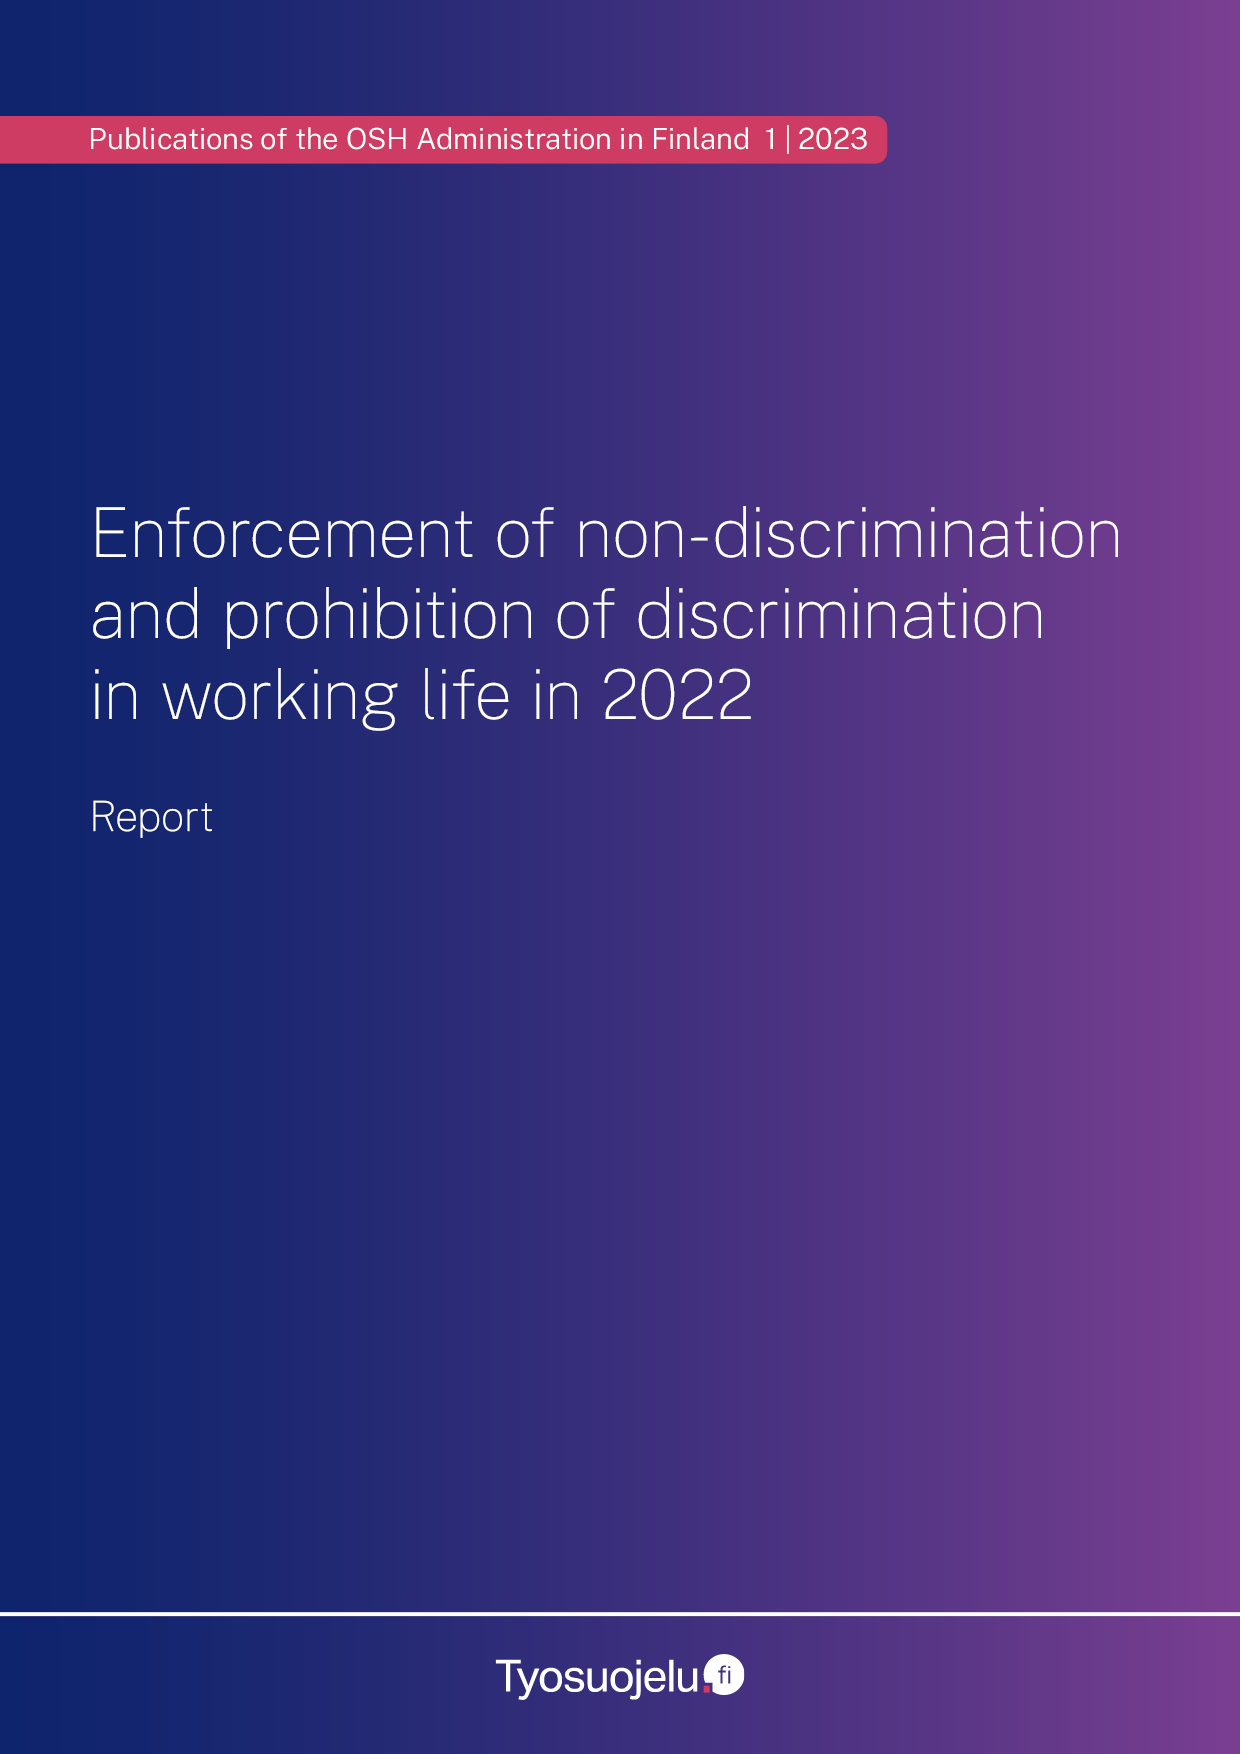 Cover of the report Enforcement of non-discrimination and prohibition of discrimination in working life in 2022.